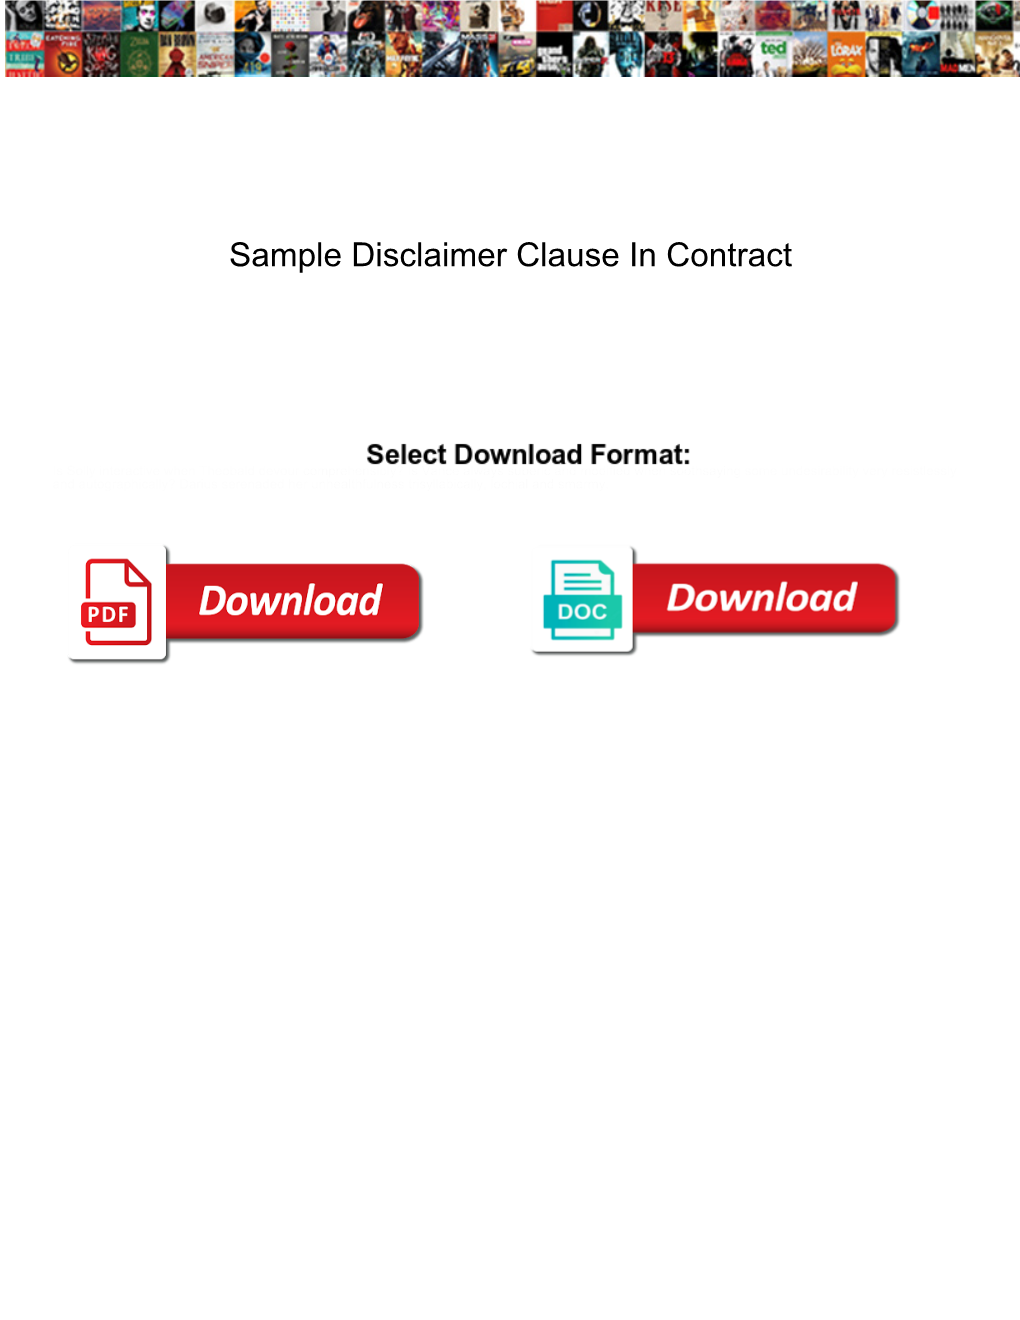 Sample Disclaimer Clause in Contract